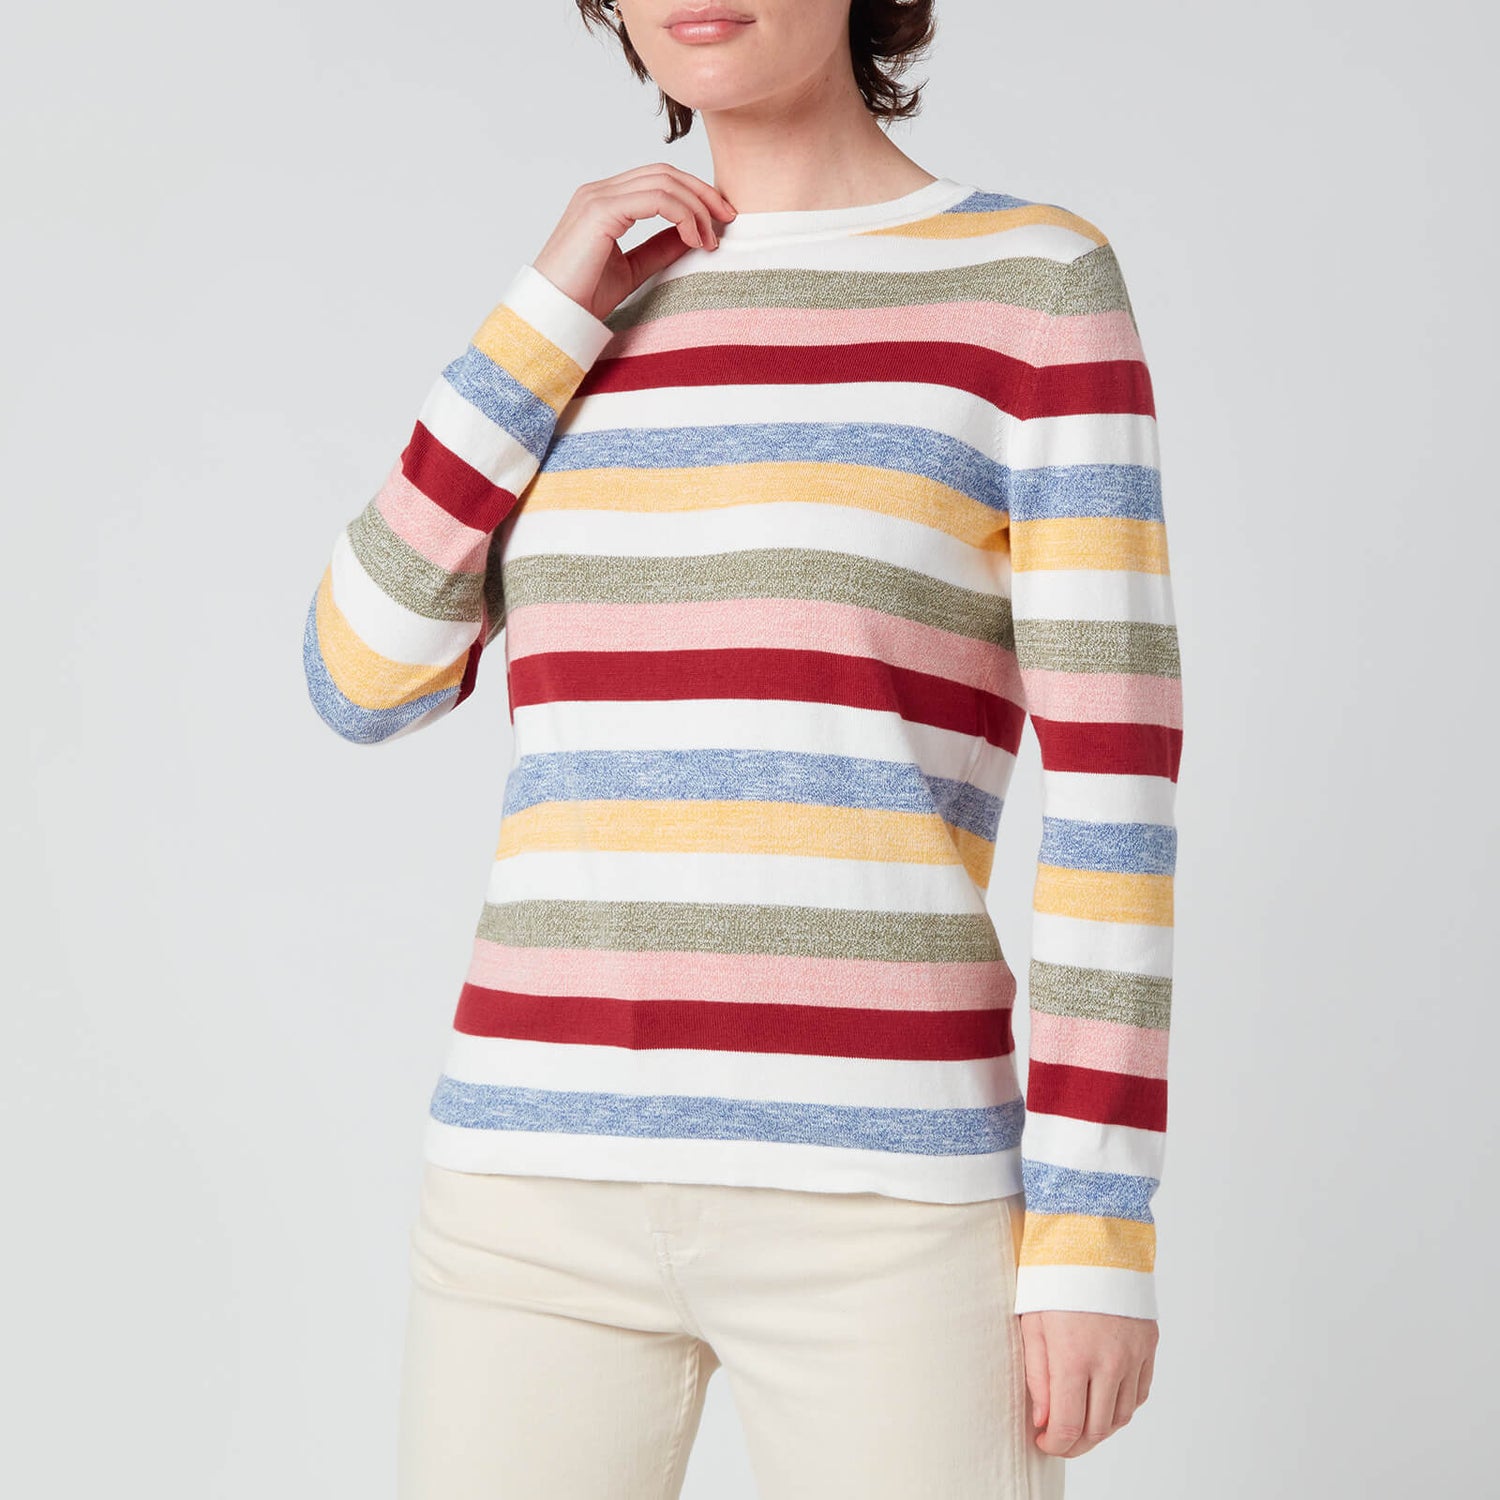 Barbour Women's Seaview Knitted Jumper - Multi